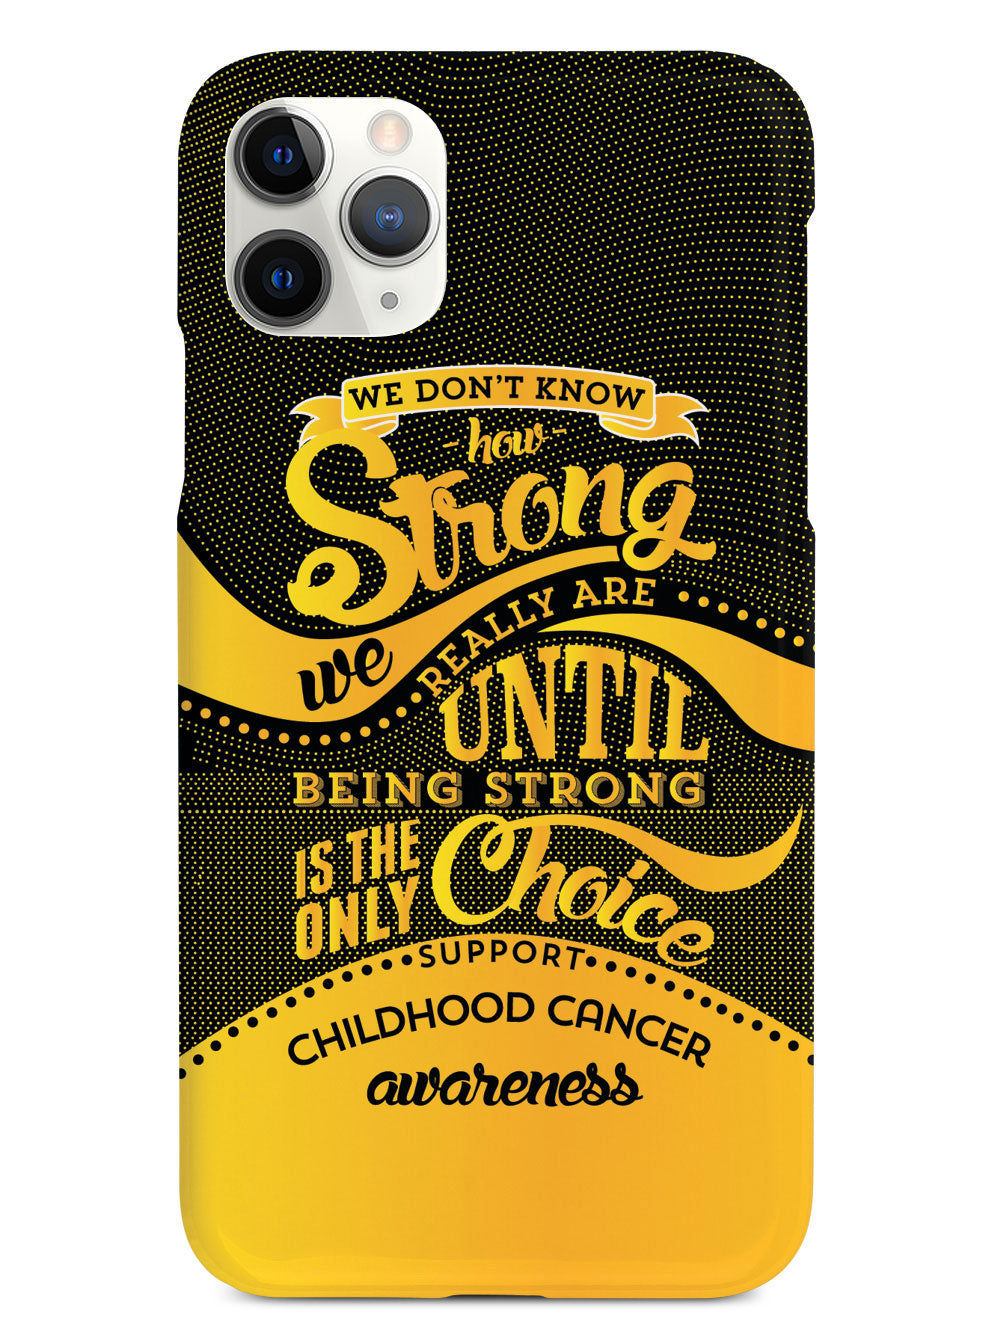 How Strong - Childhood Cancer Awareness Case